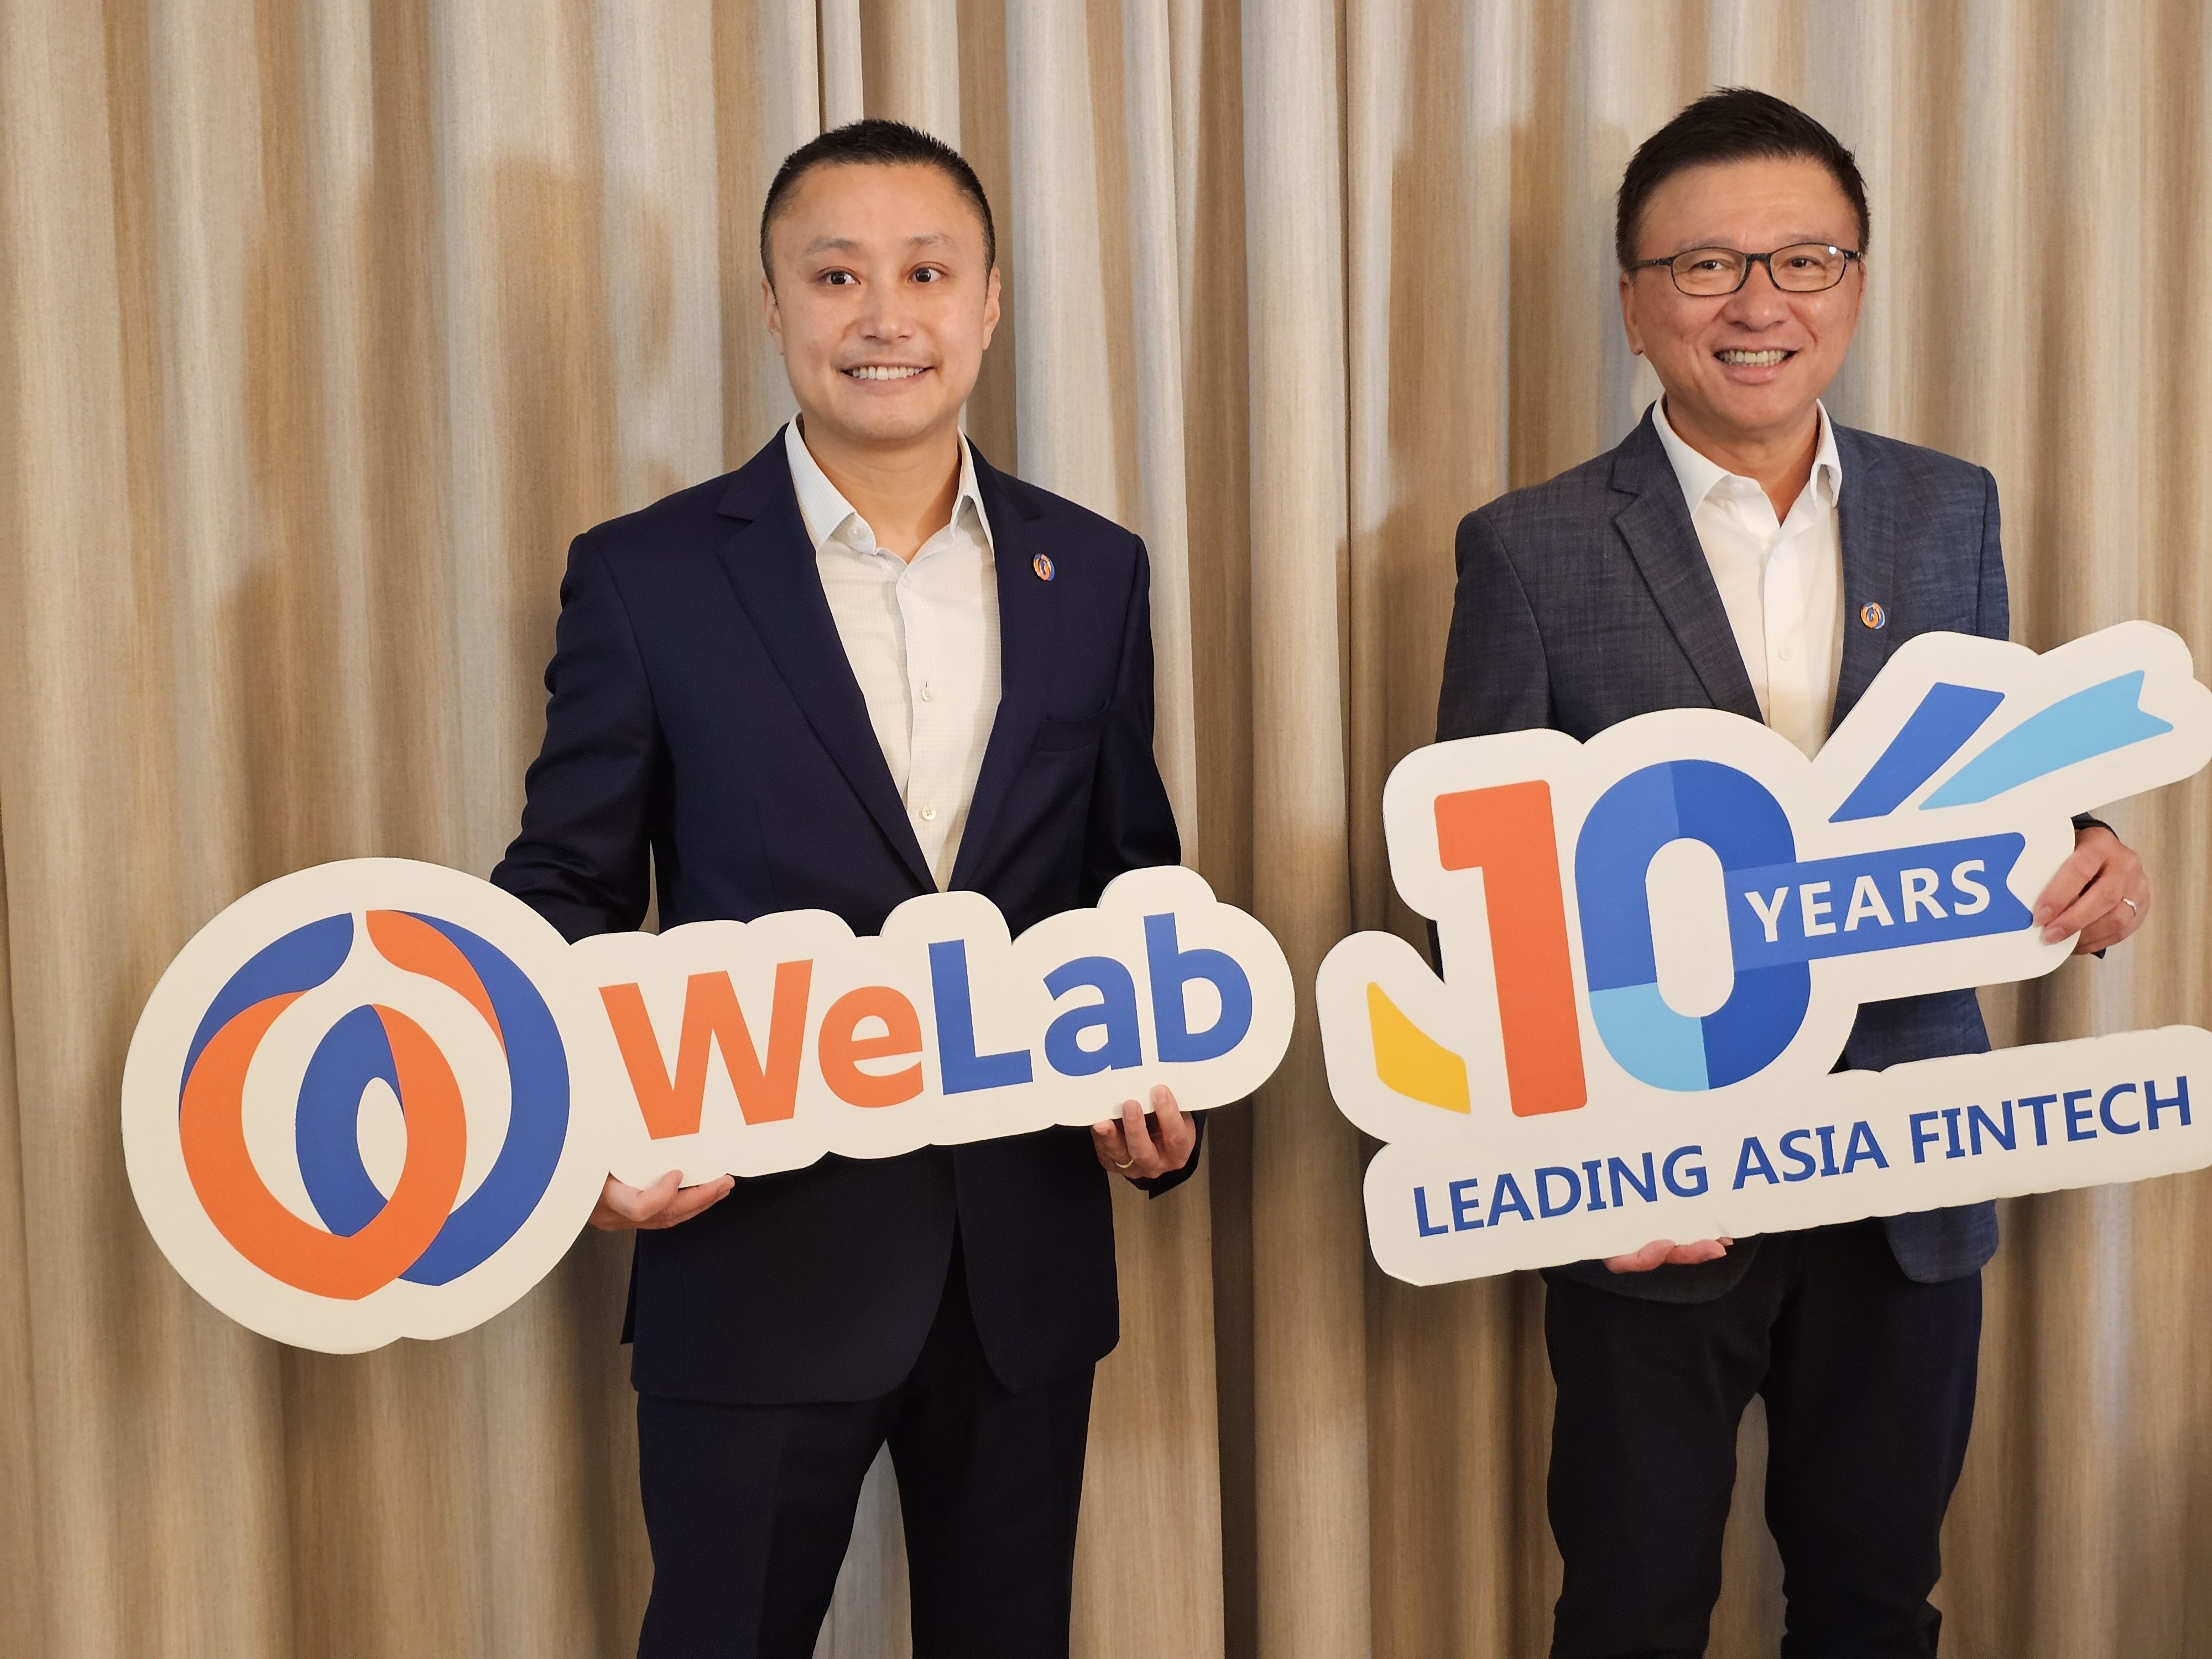 scmp.com - Enoch Yiu - WeLab has a target of 500 million users in the next decade